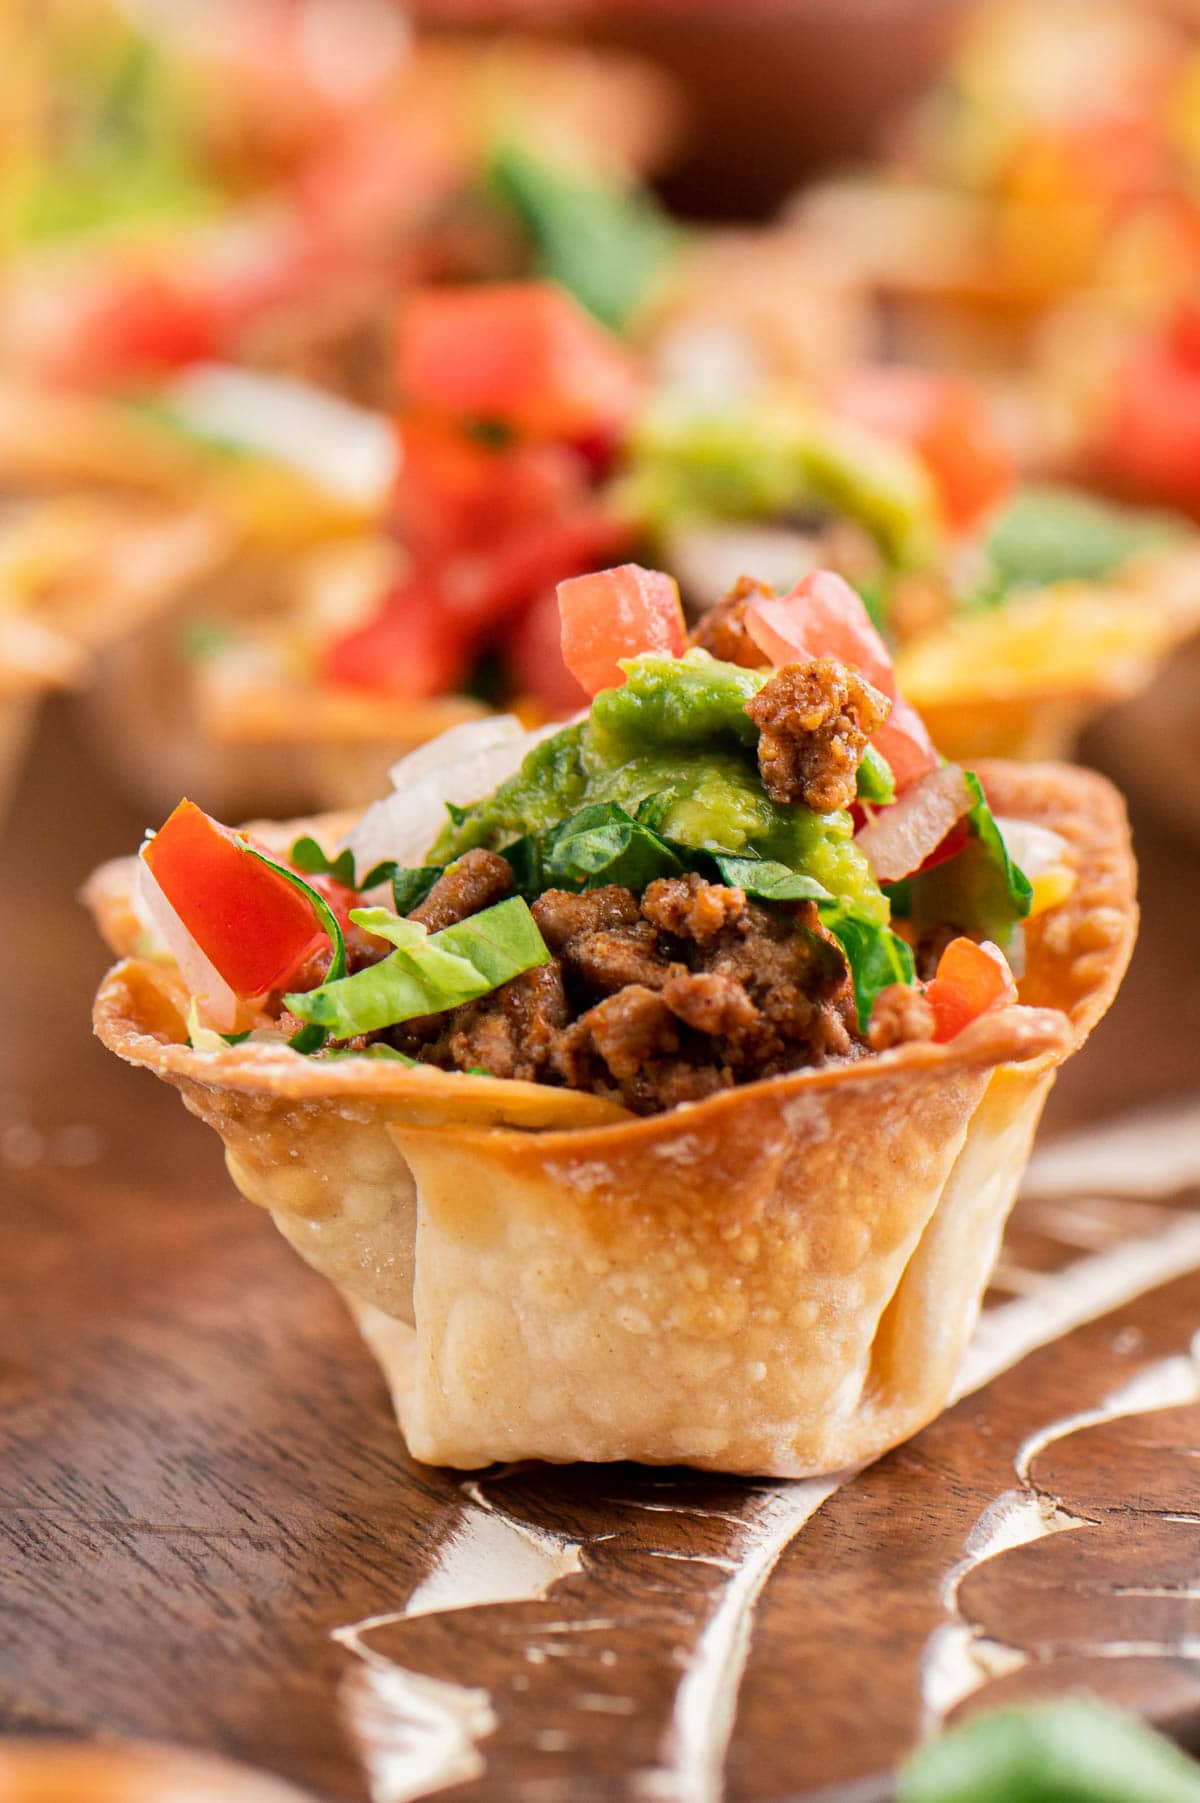 Wonton cup filled with taco meat, cheese and lettuce